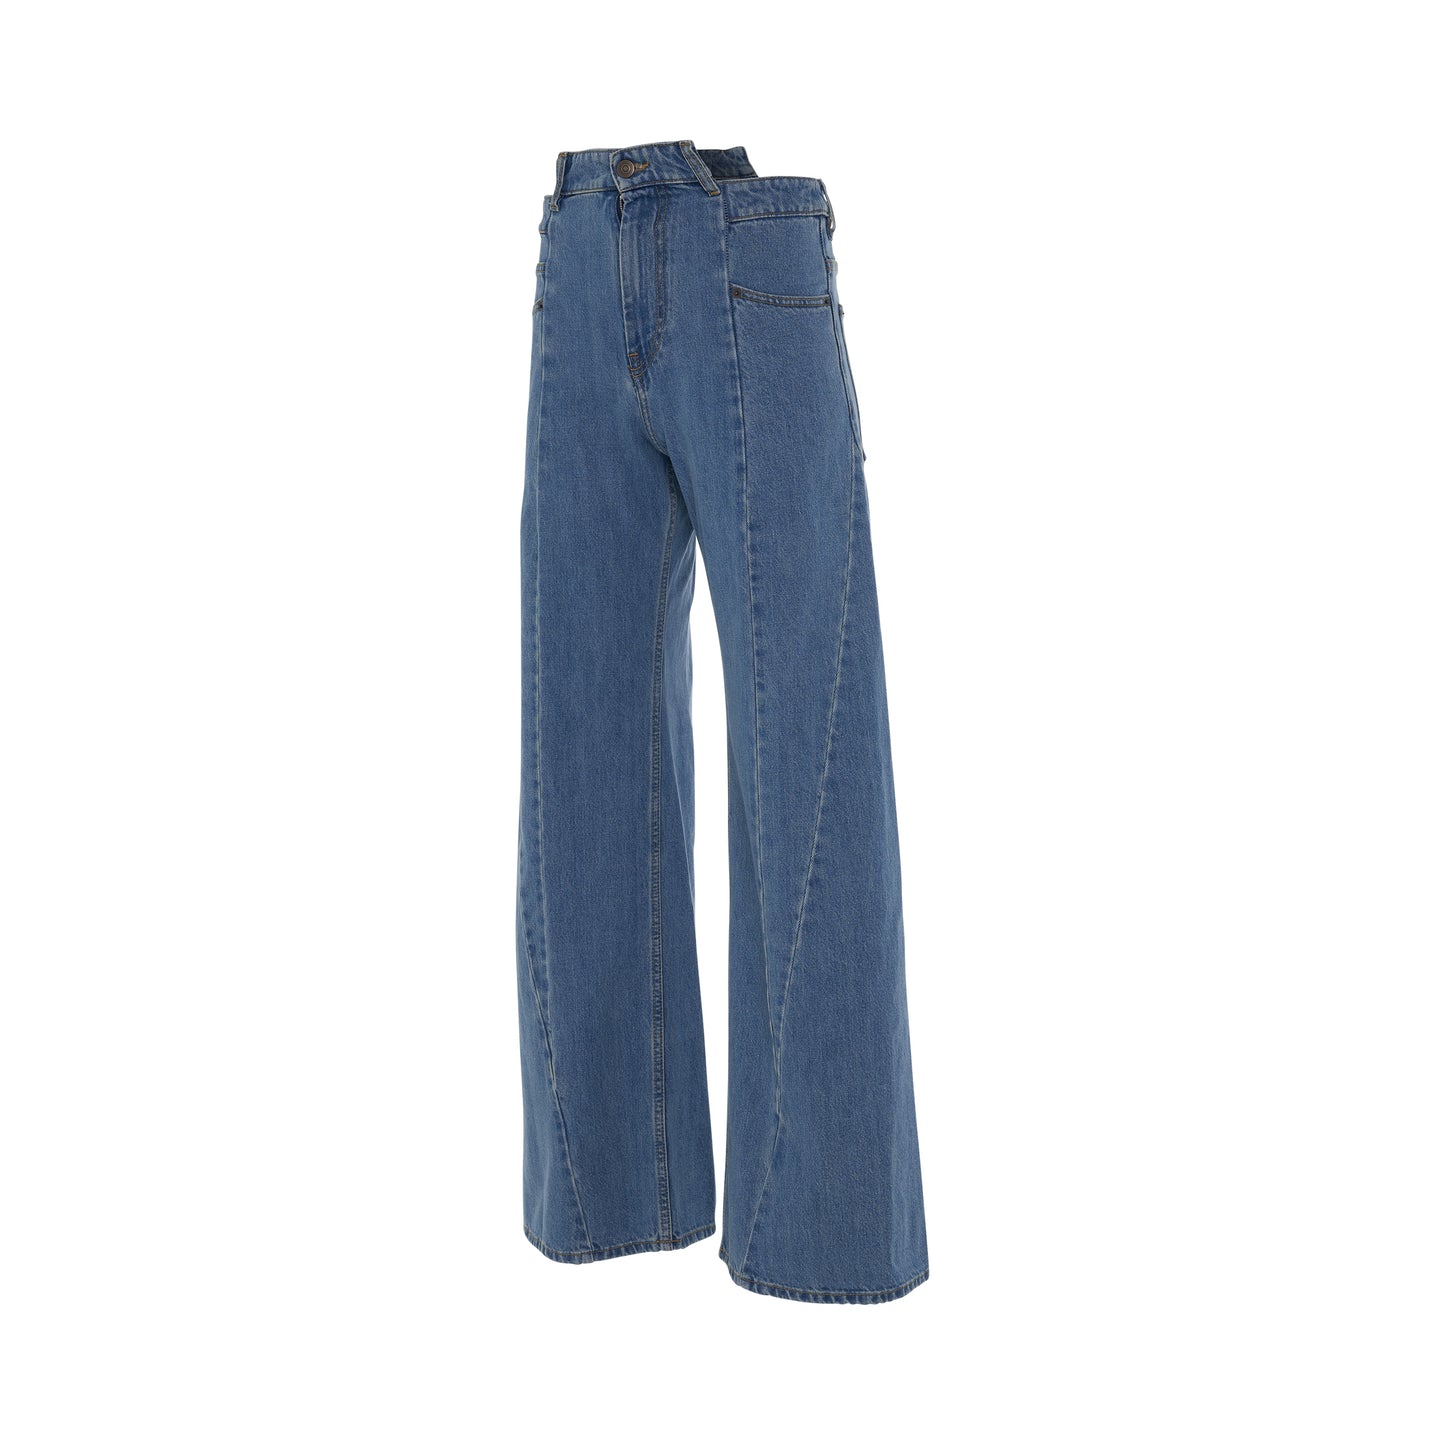 Cut Out Waistband Relaxed Fit Denim Jeans